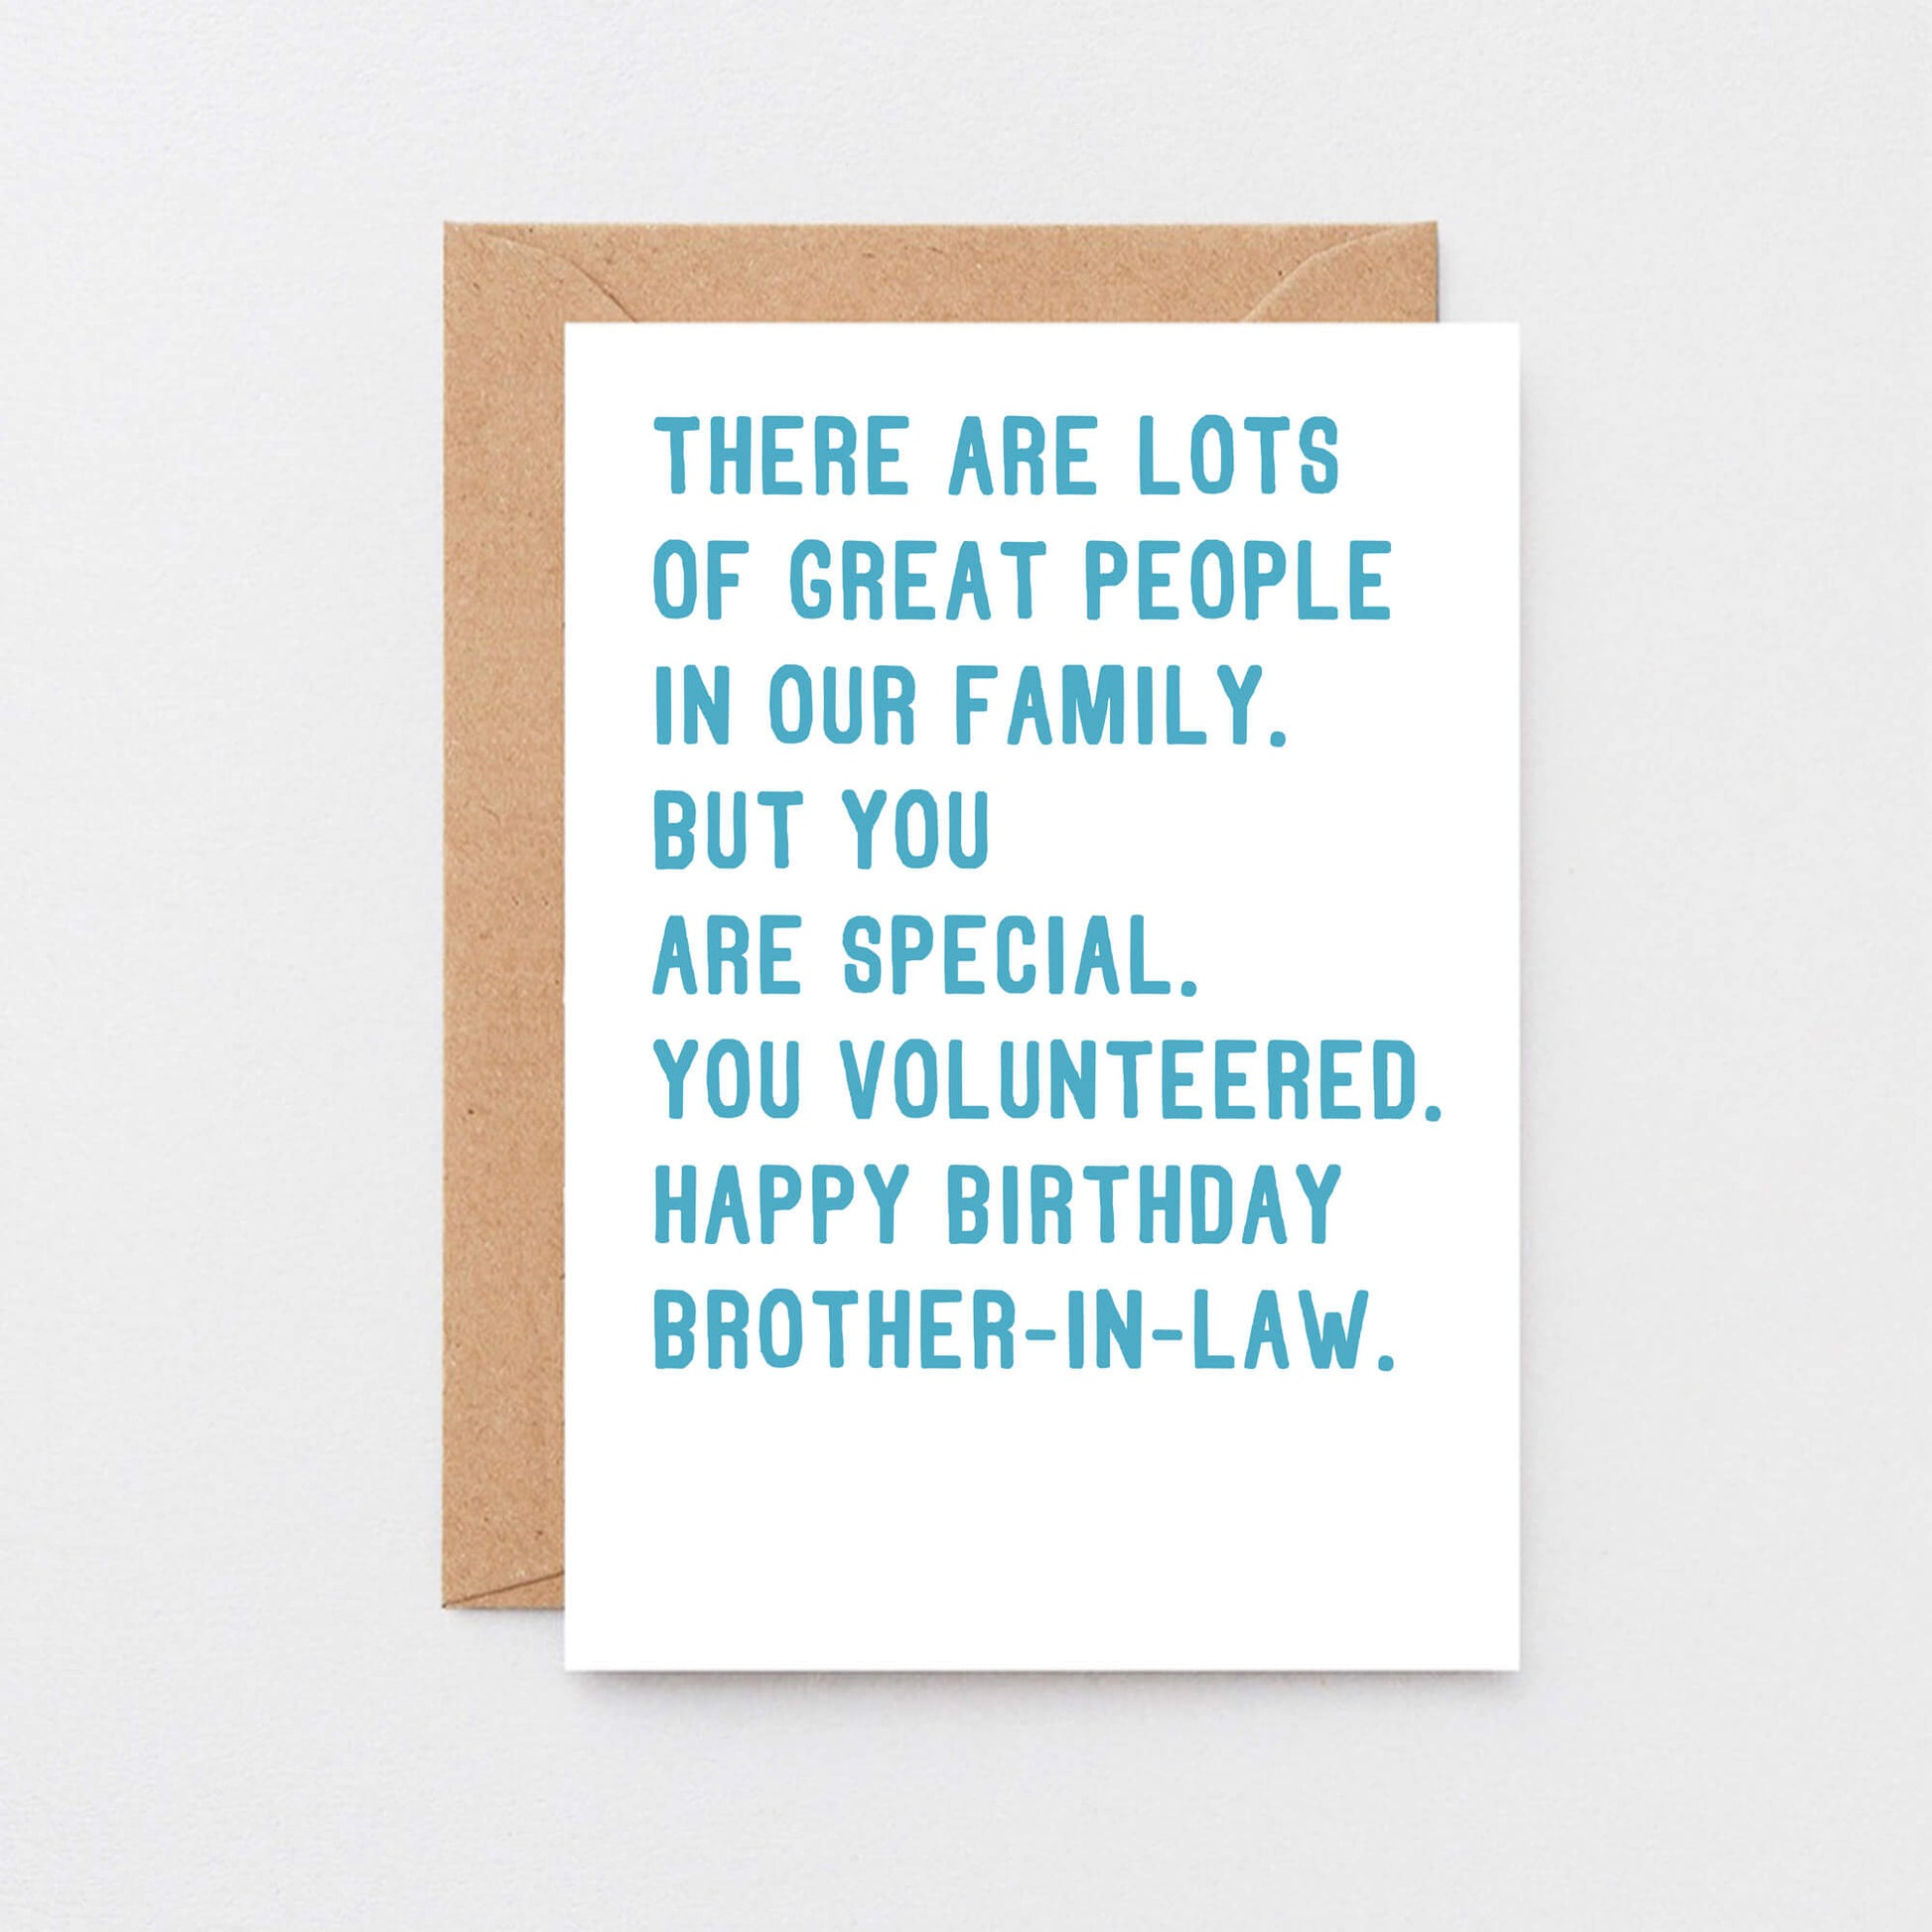 Brother-In-Law Birthday Card by SixElevenCreations. Reads There are lots of great people in our family. But you are special. You volunteered. Happy birthday brother-in-law. Product Code SE2071A5